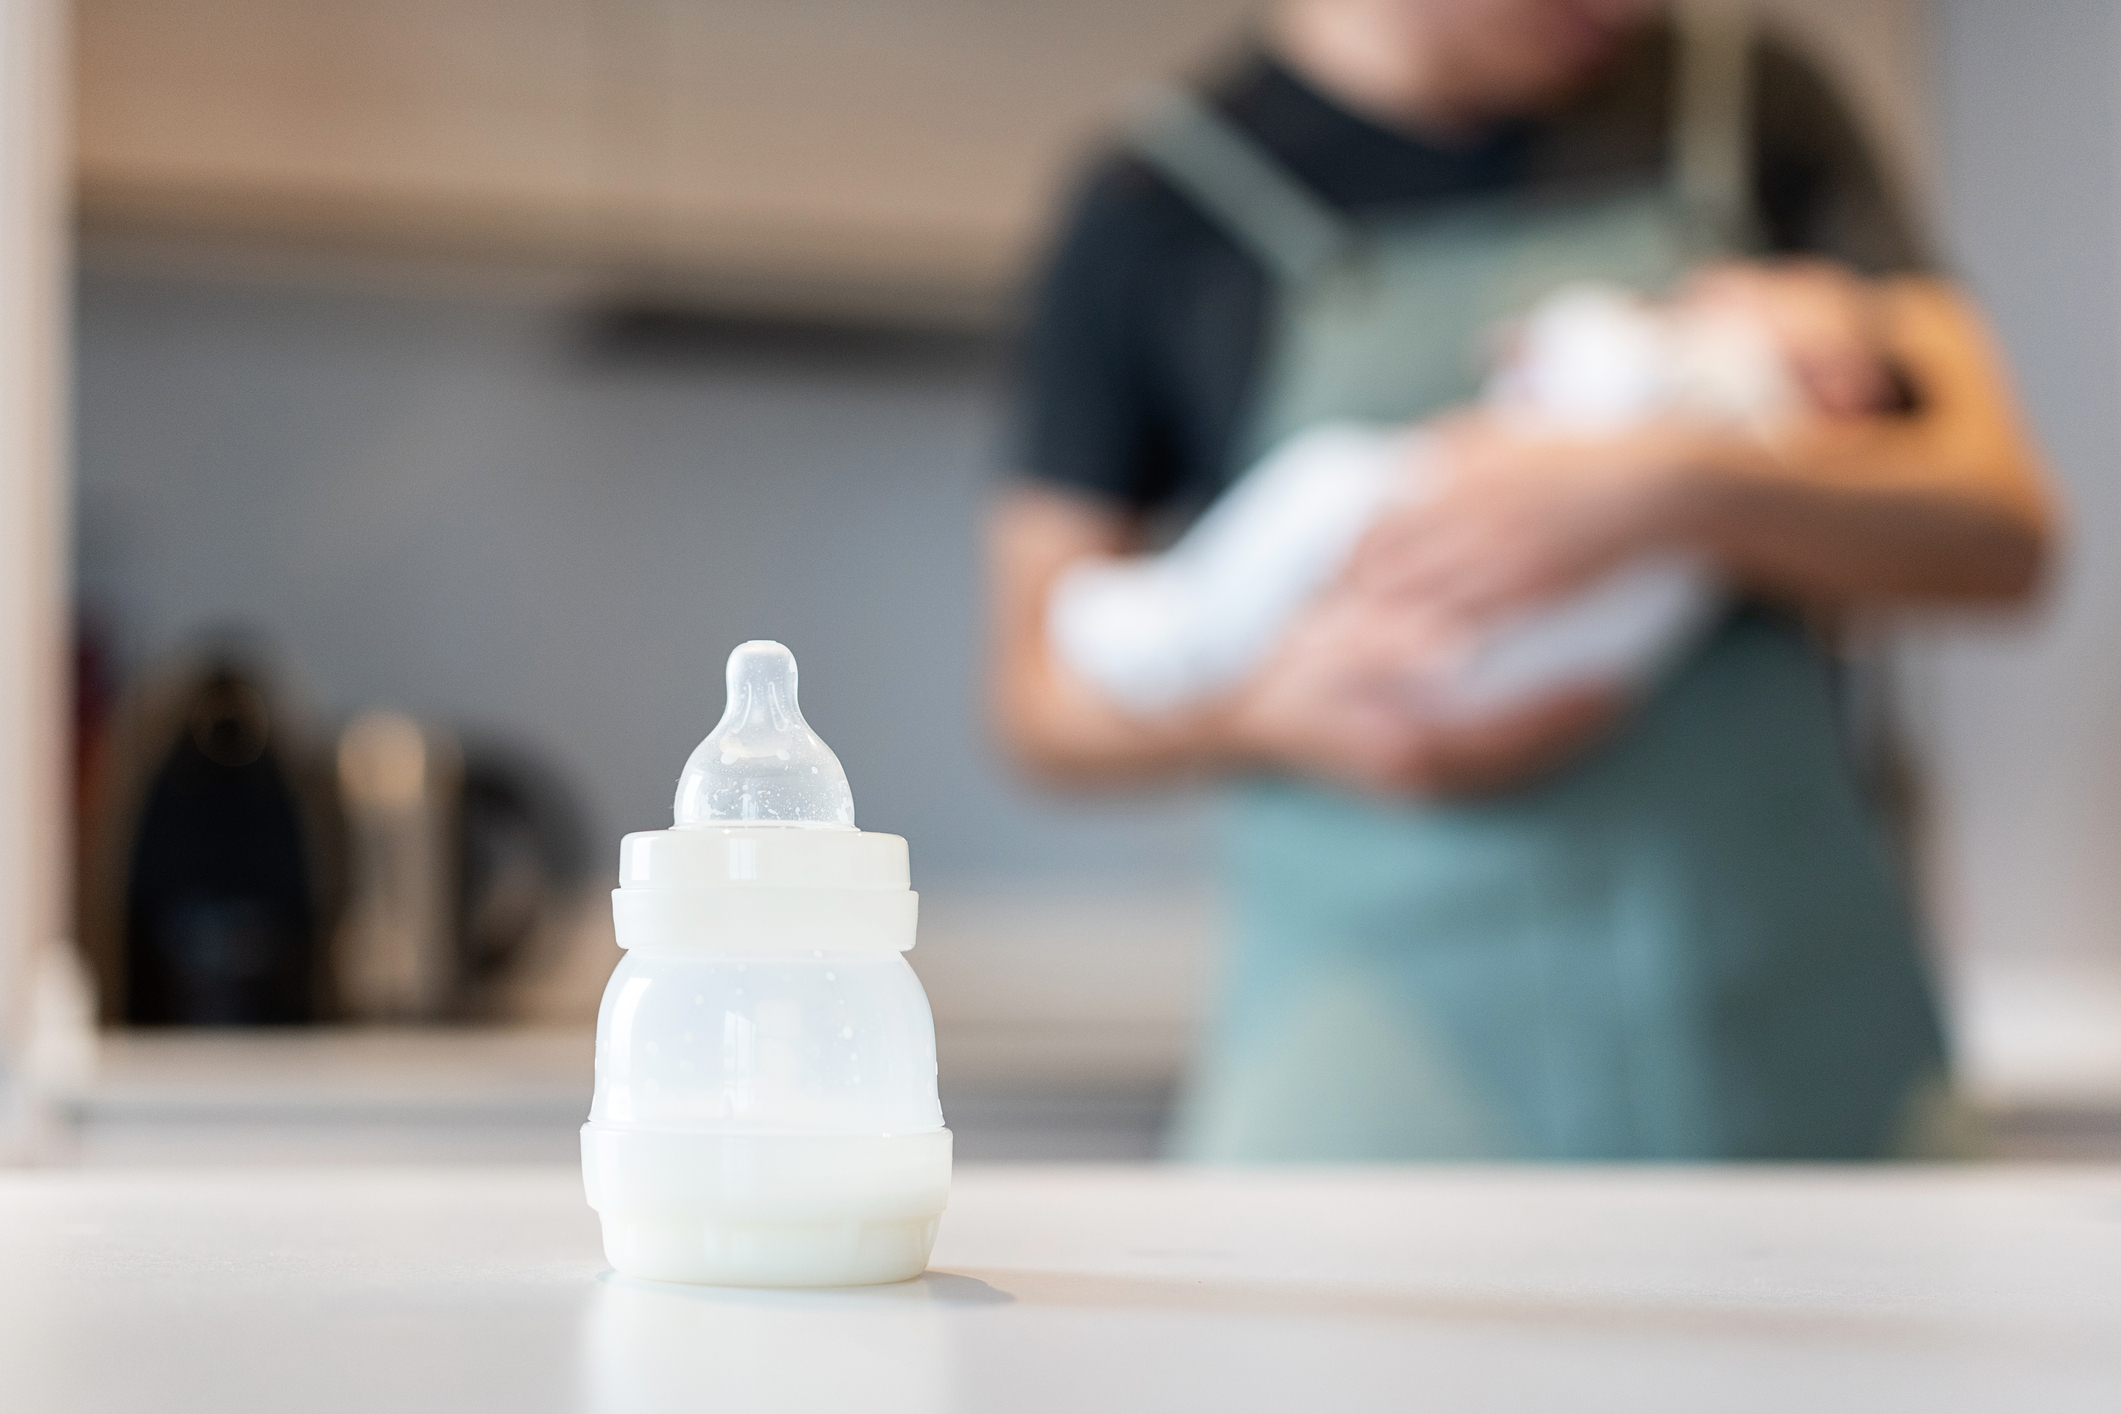 A person wearing an apron holds a baby in the background, with a focus on a baby bottle in the foreground